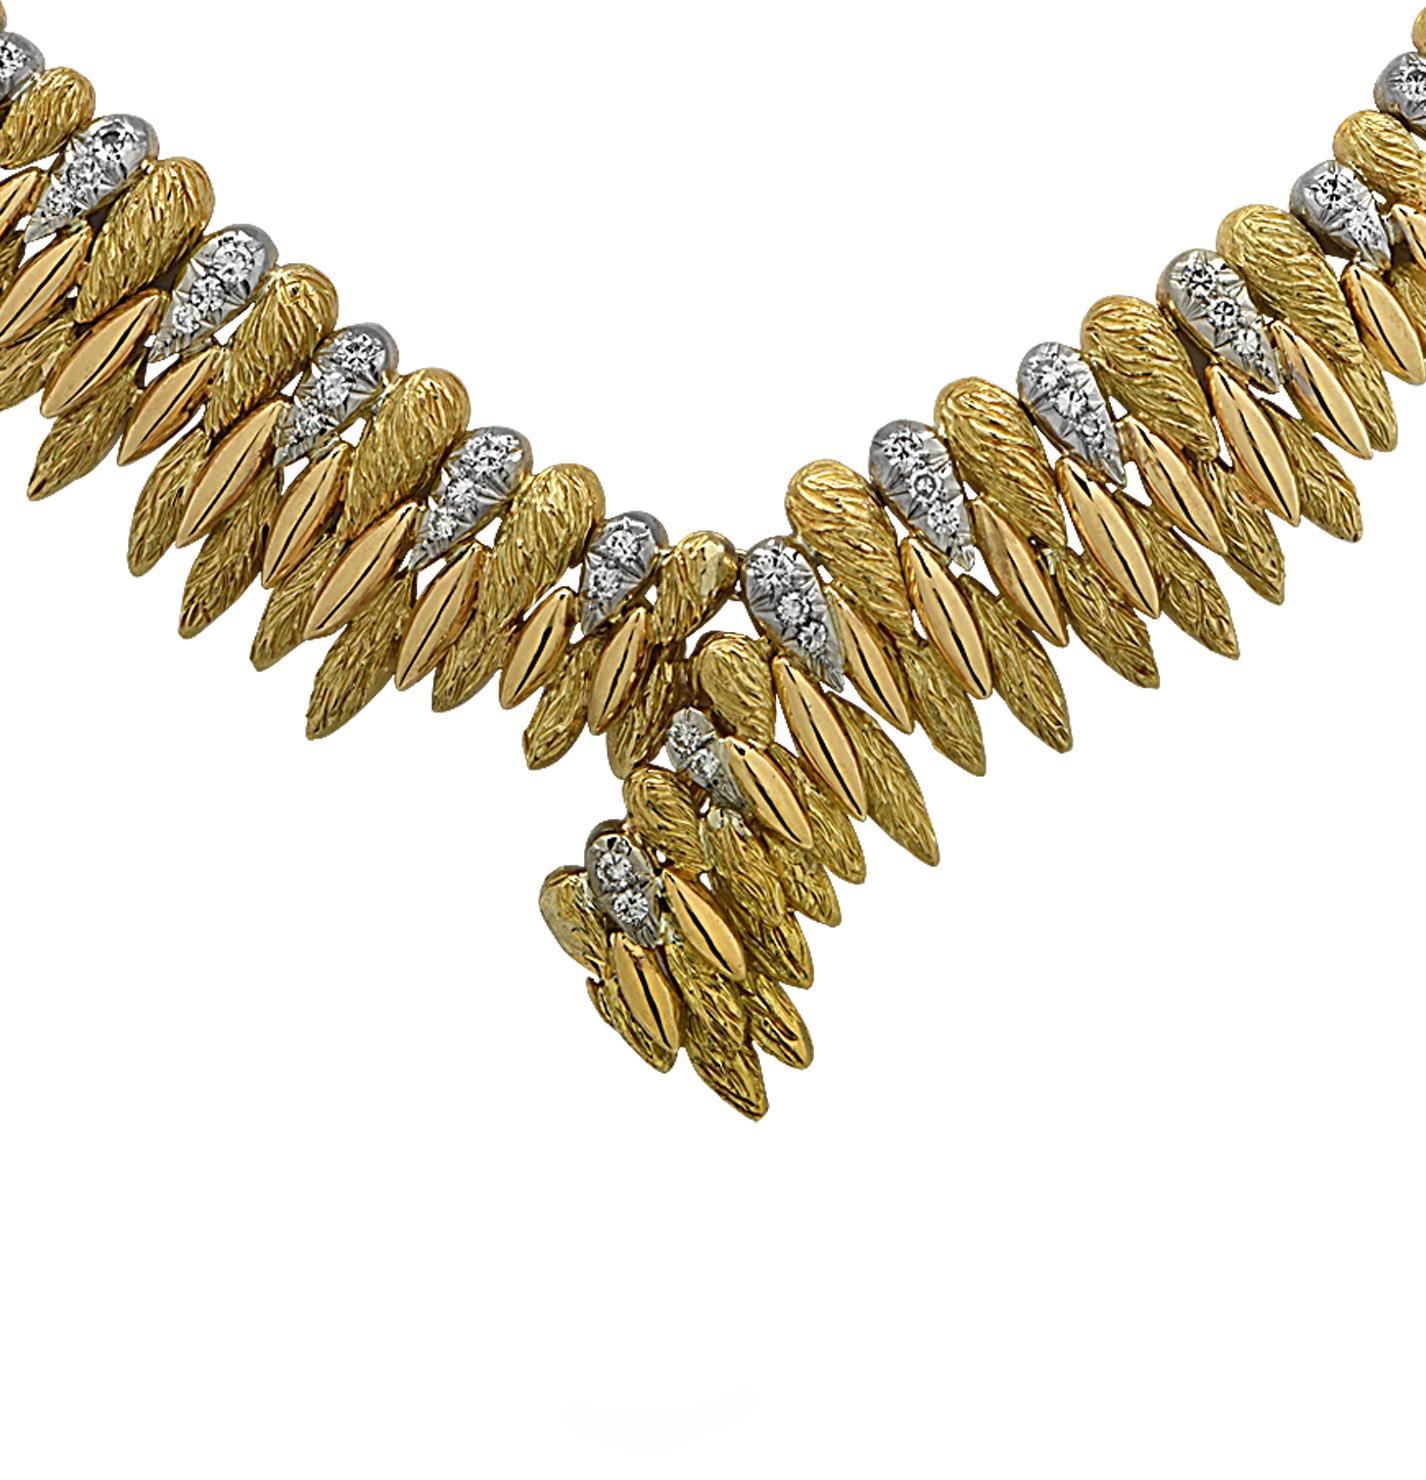 Finely crafted in France, this stunning 18 karat white and yellow gold v-shaped necklace features 54 round brilliant cut diamonds weighing approximately 1.35 carats total, G color, VS-SI clarity. Textured yellow gold beads, highly polished yellow